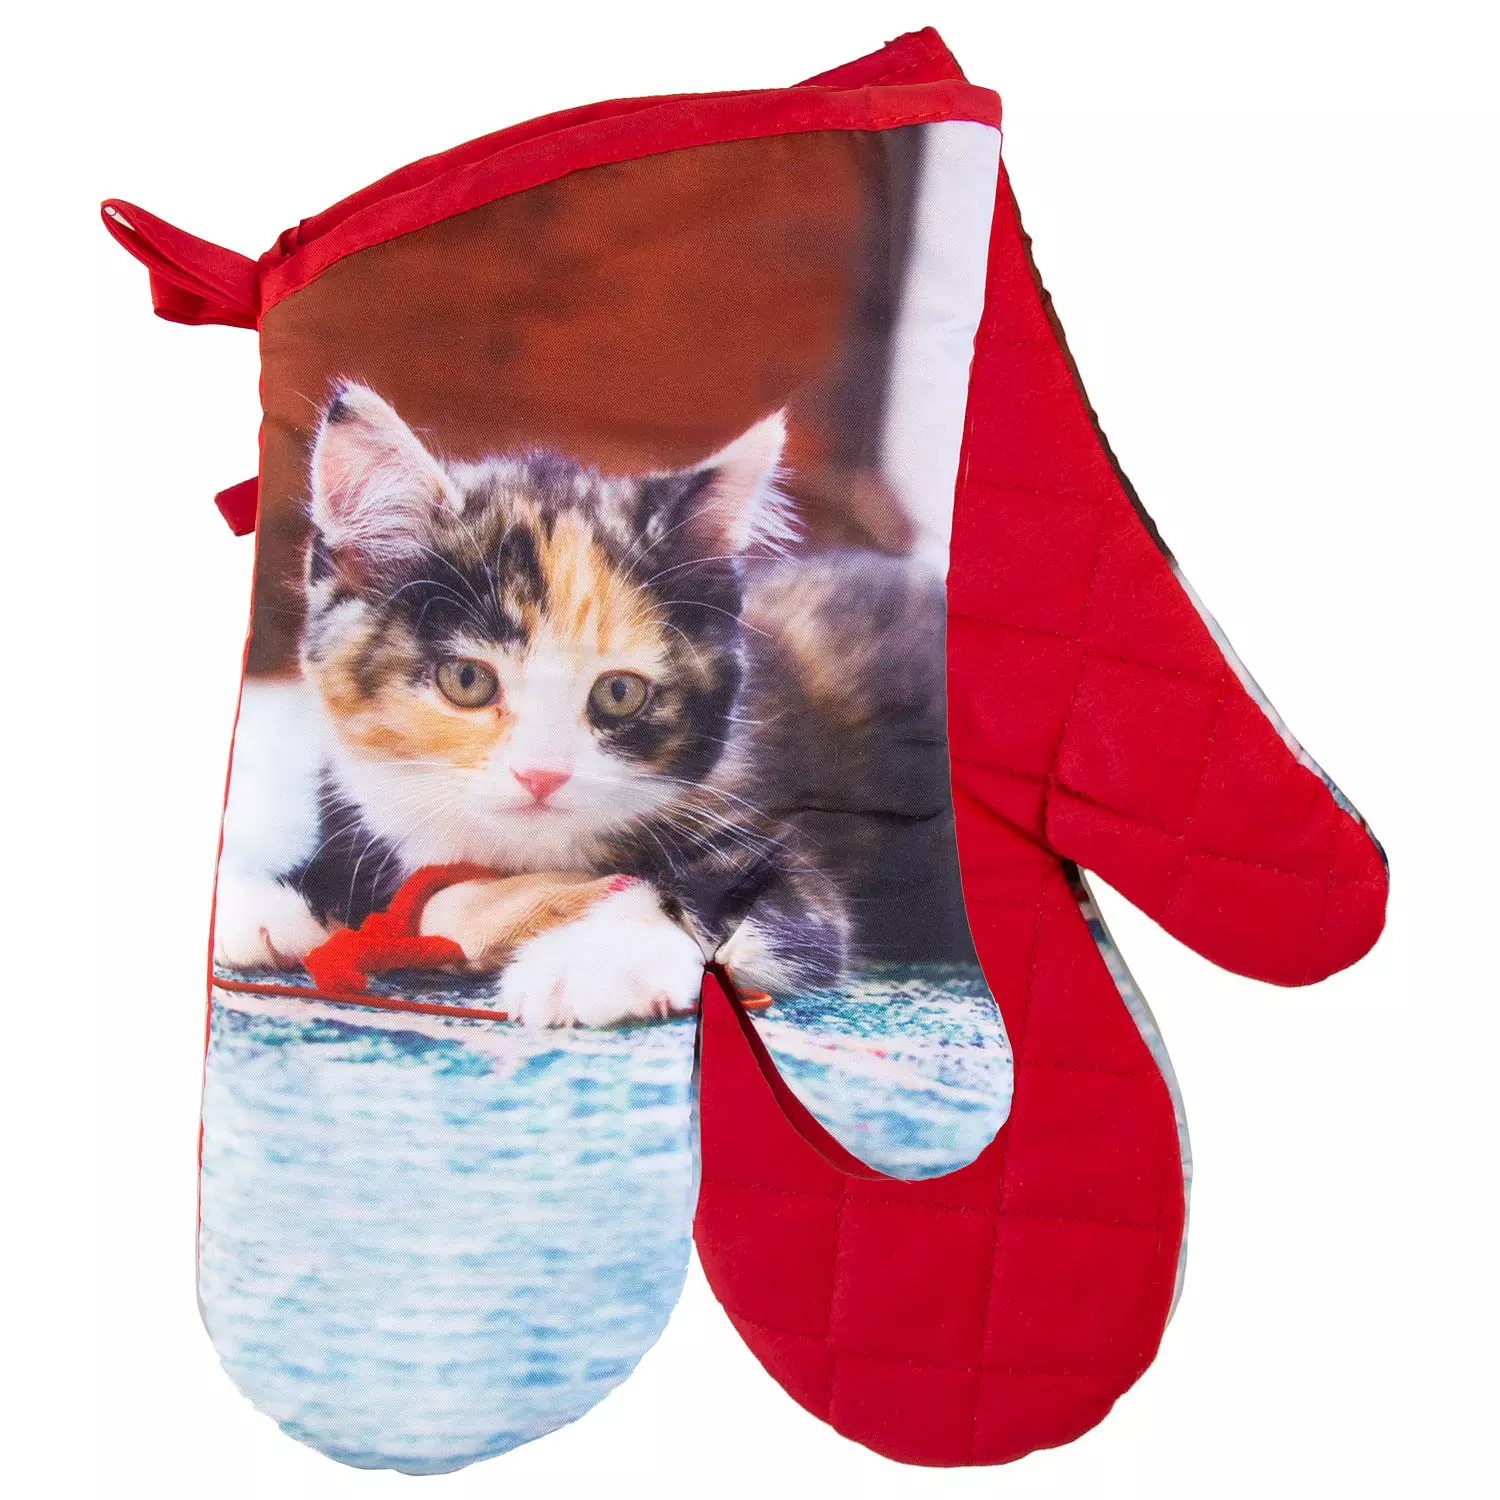 Cotton Concepts - Set of 2 heat resistant oven mitts - Purrrfect